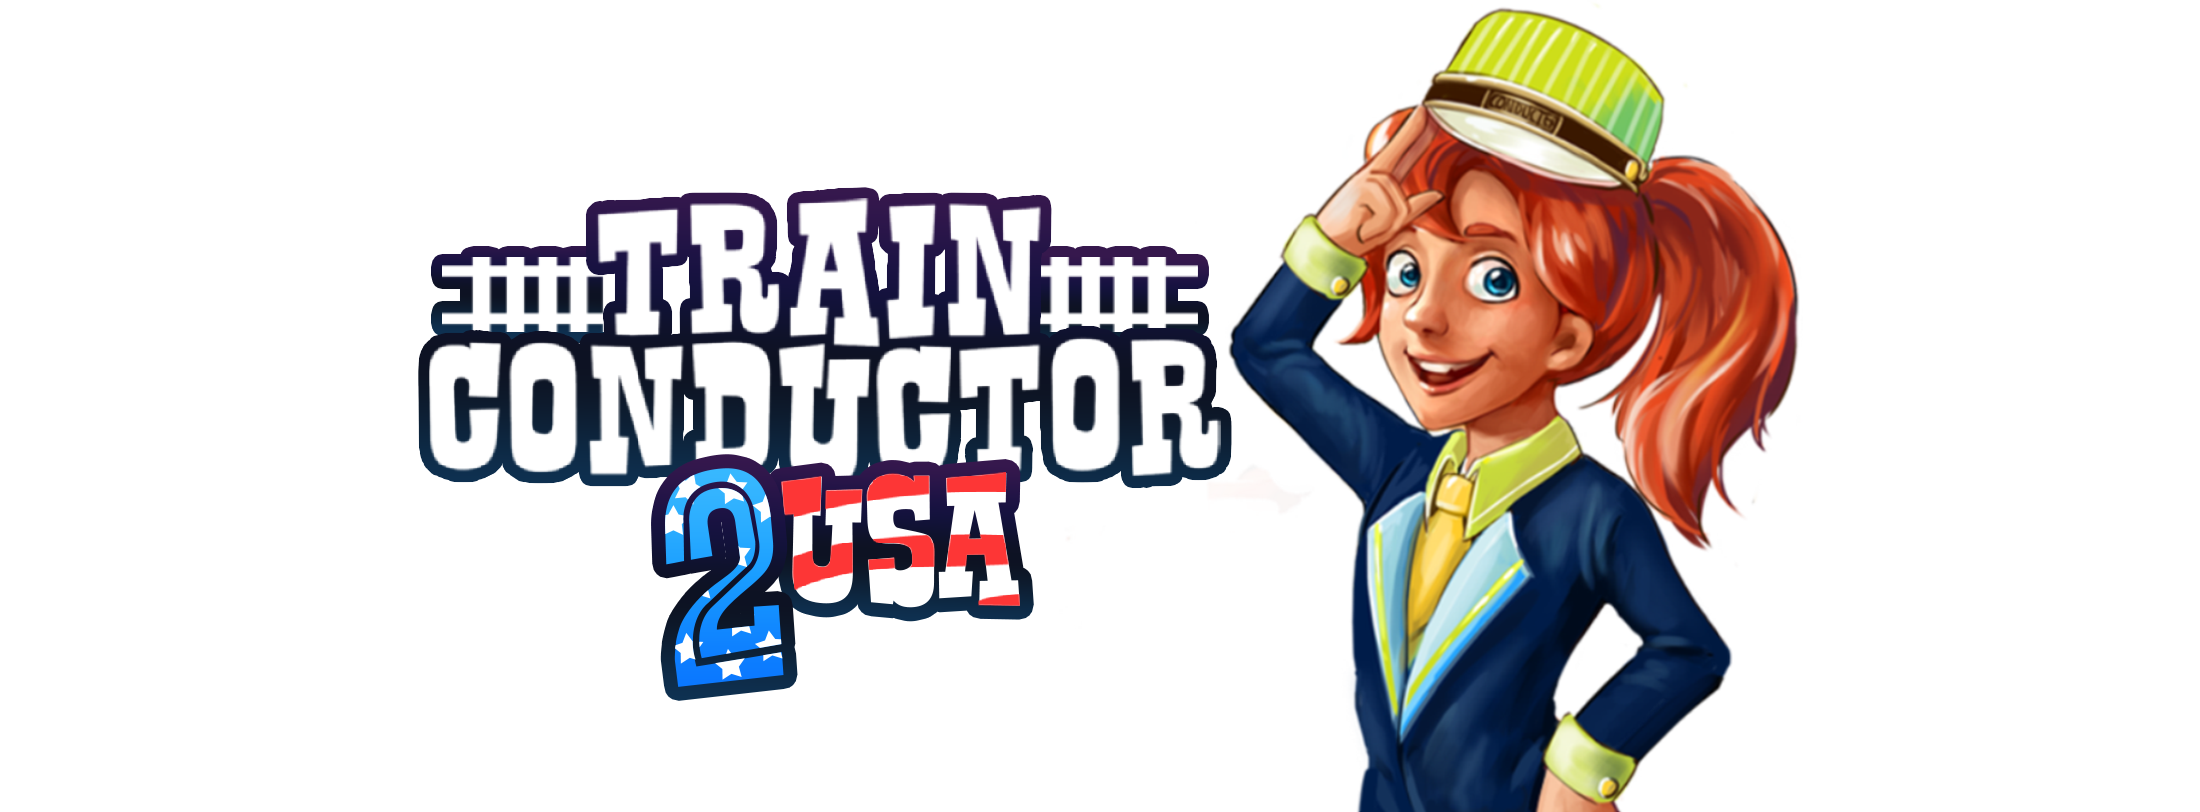 Train Conductor 2: USA banner image front layer